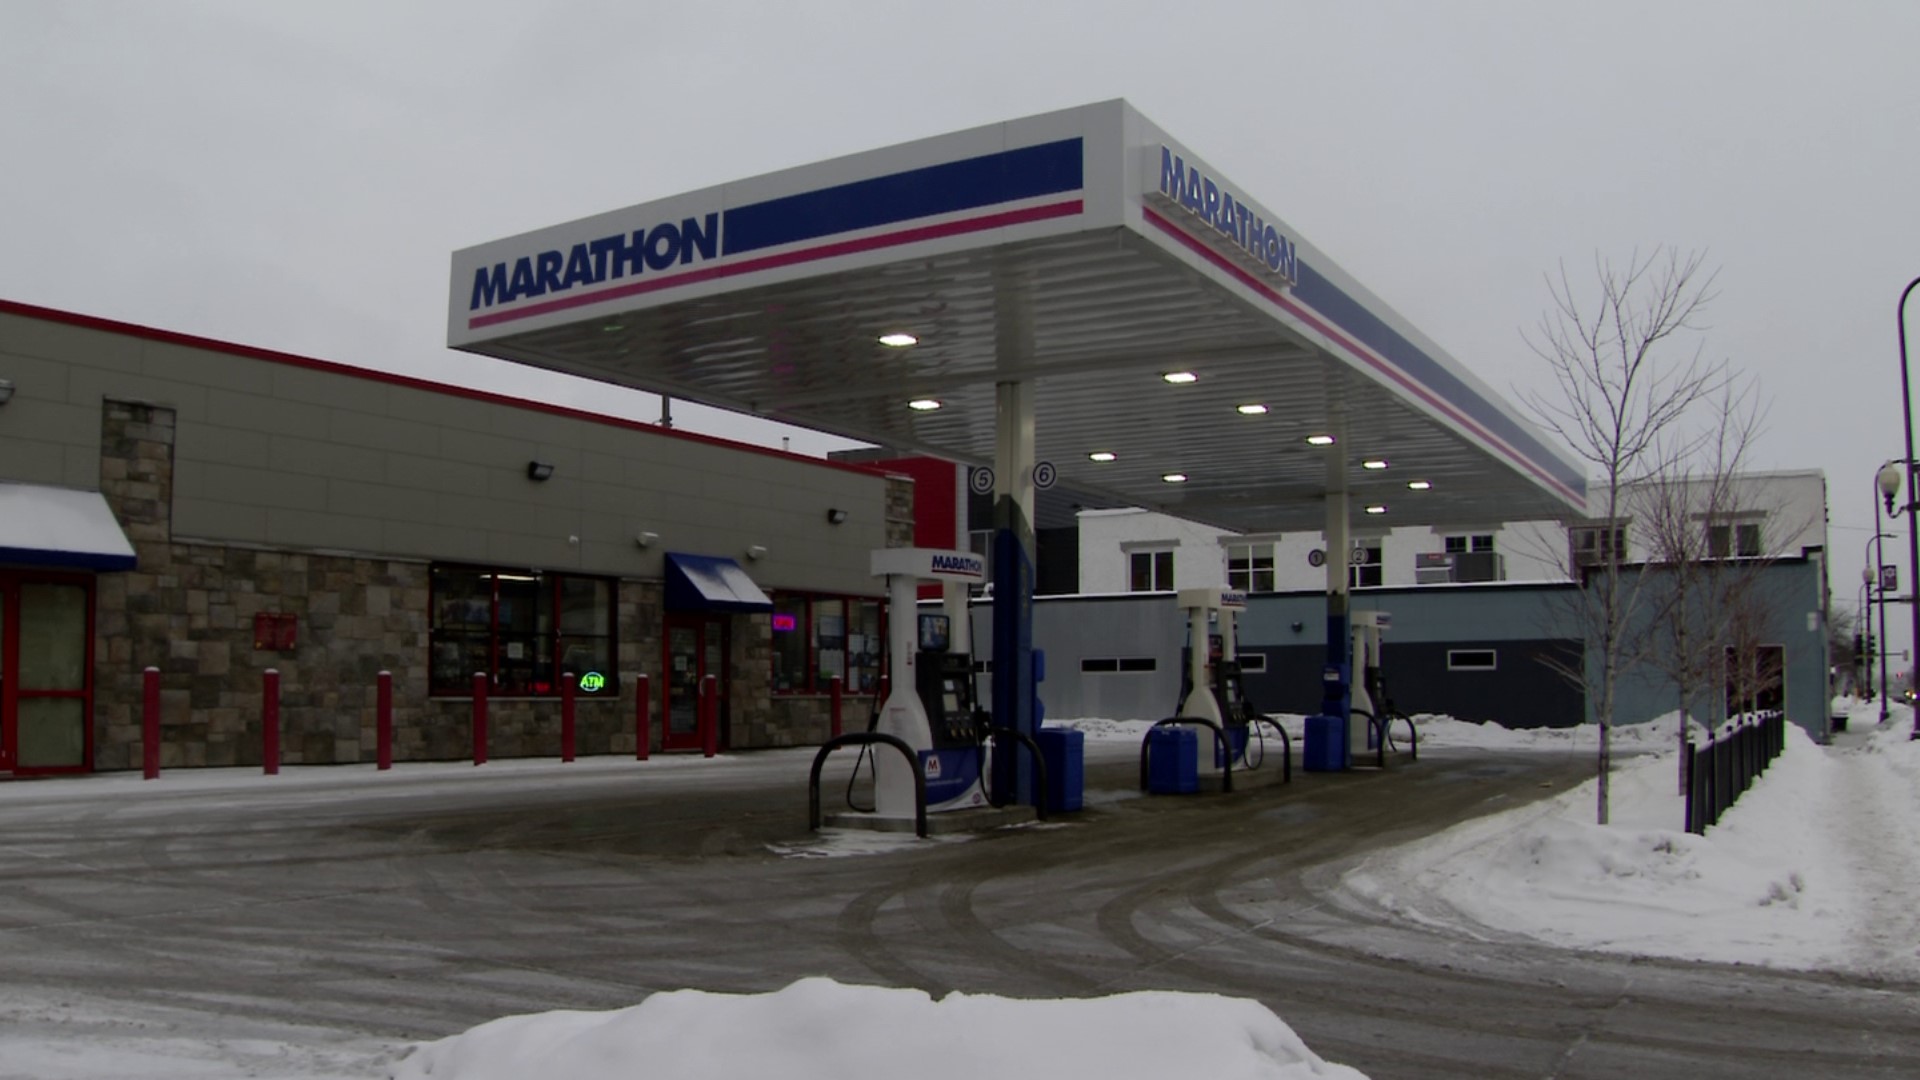 These days, a stop at the Marathon gas station on the corner of West Broadway and Fremont Avenue North feels different for some.